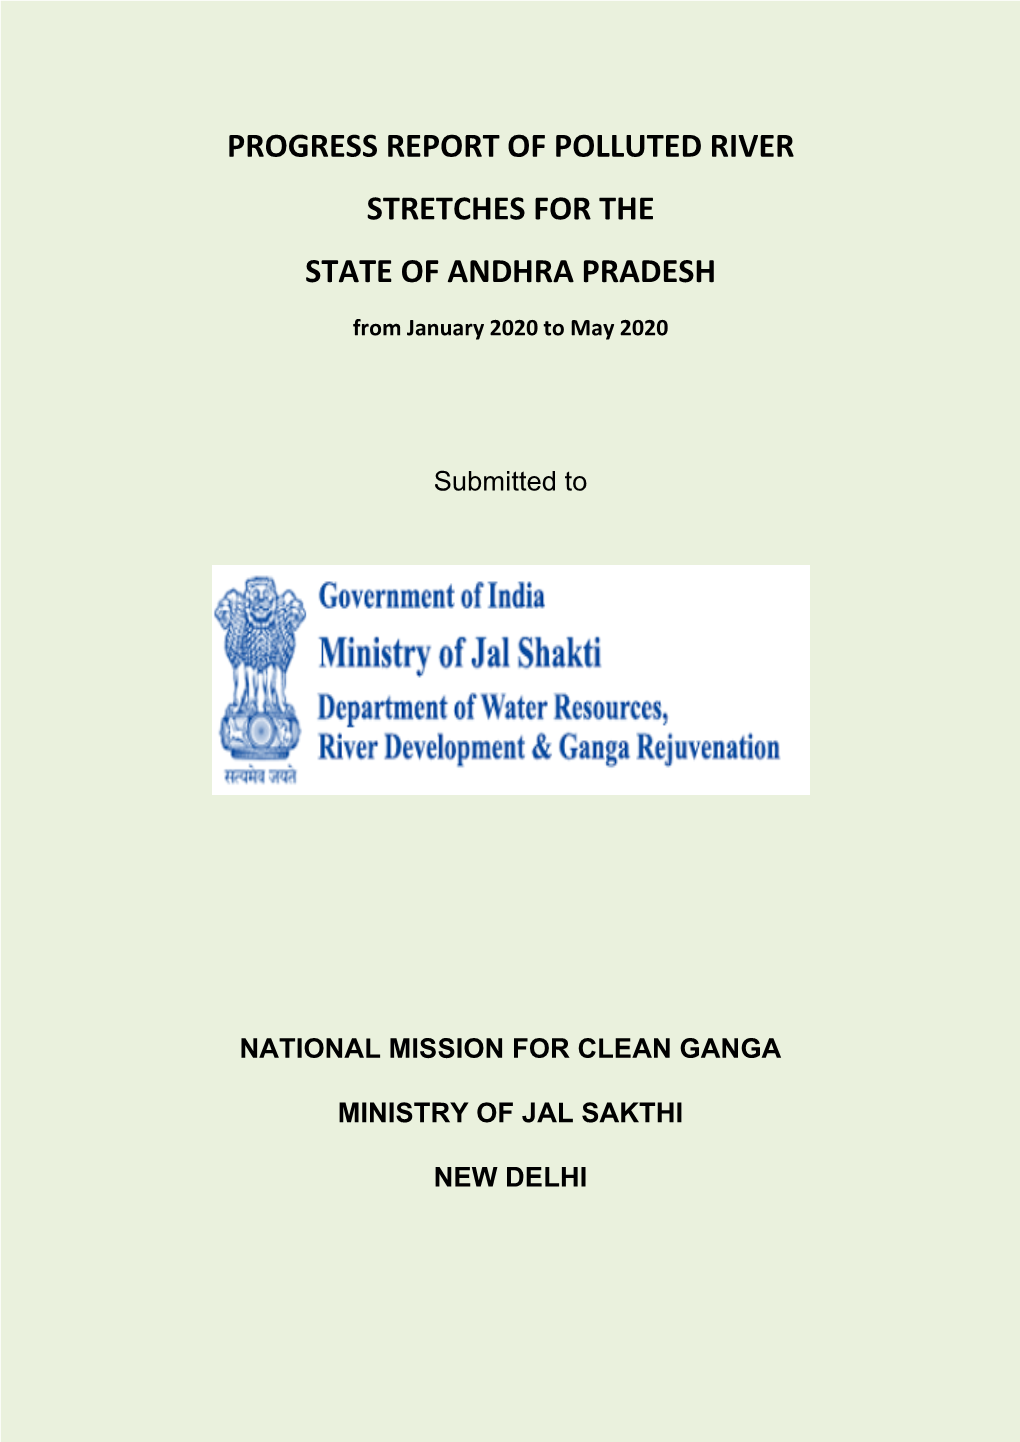 Progress Report of Polluted River Stretches for the State of Andhra Pradesh